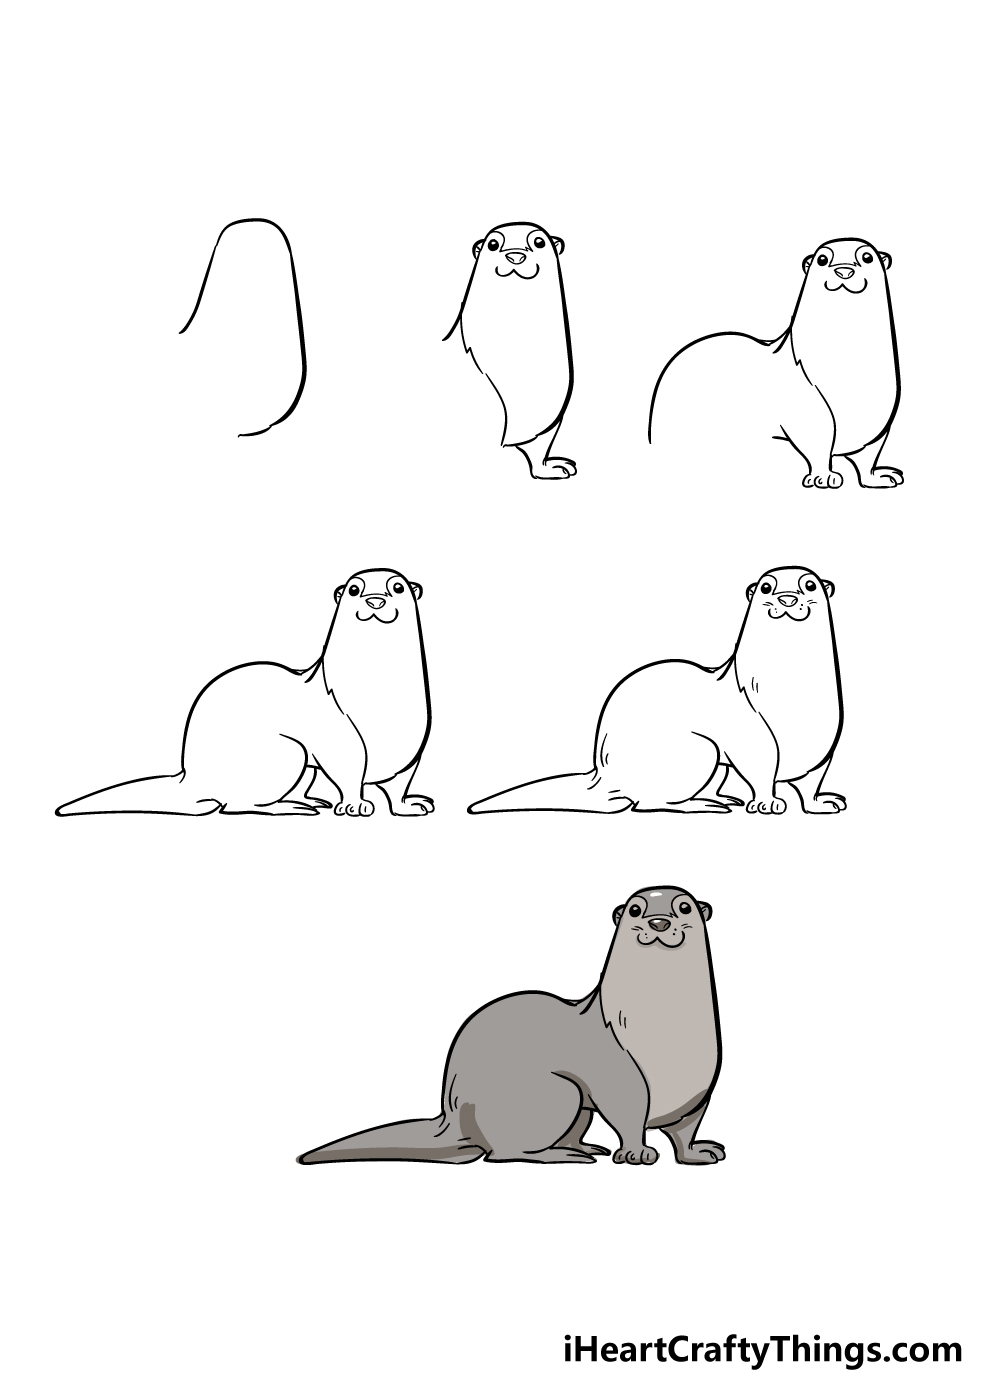 how to draw an otter in 6 steps